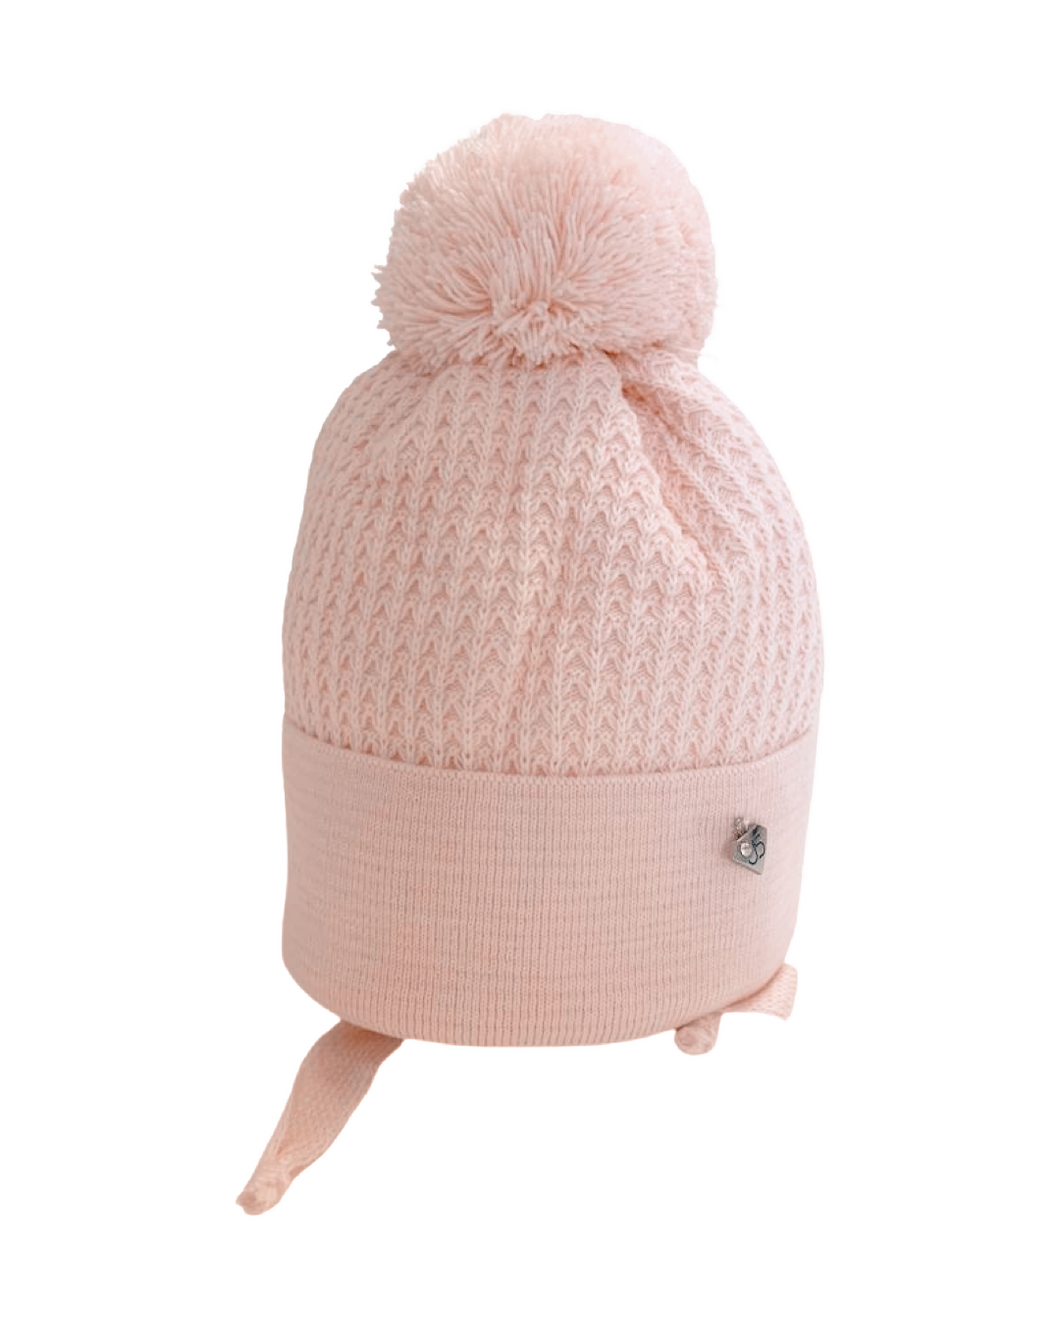 Girls knitted Hat